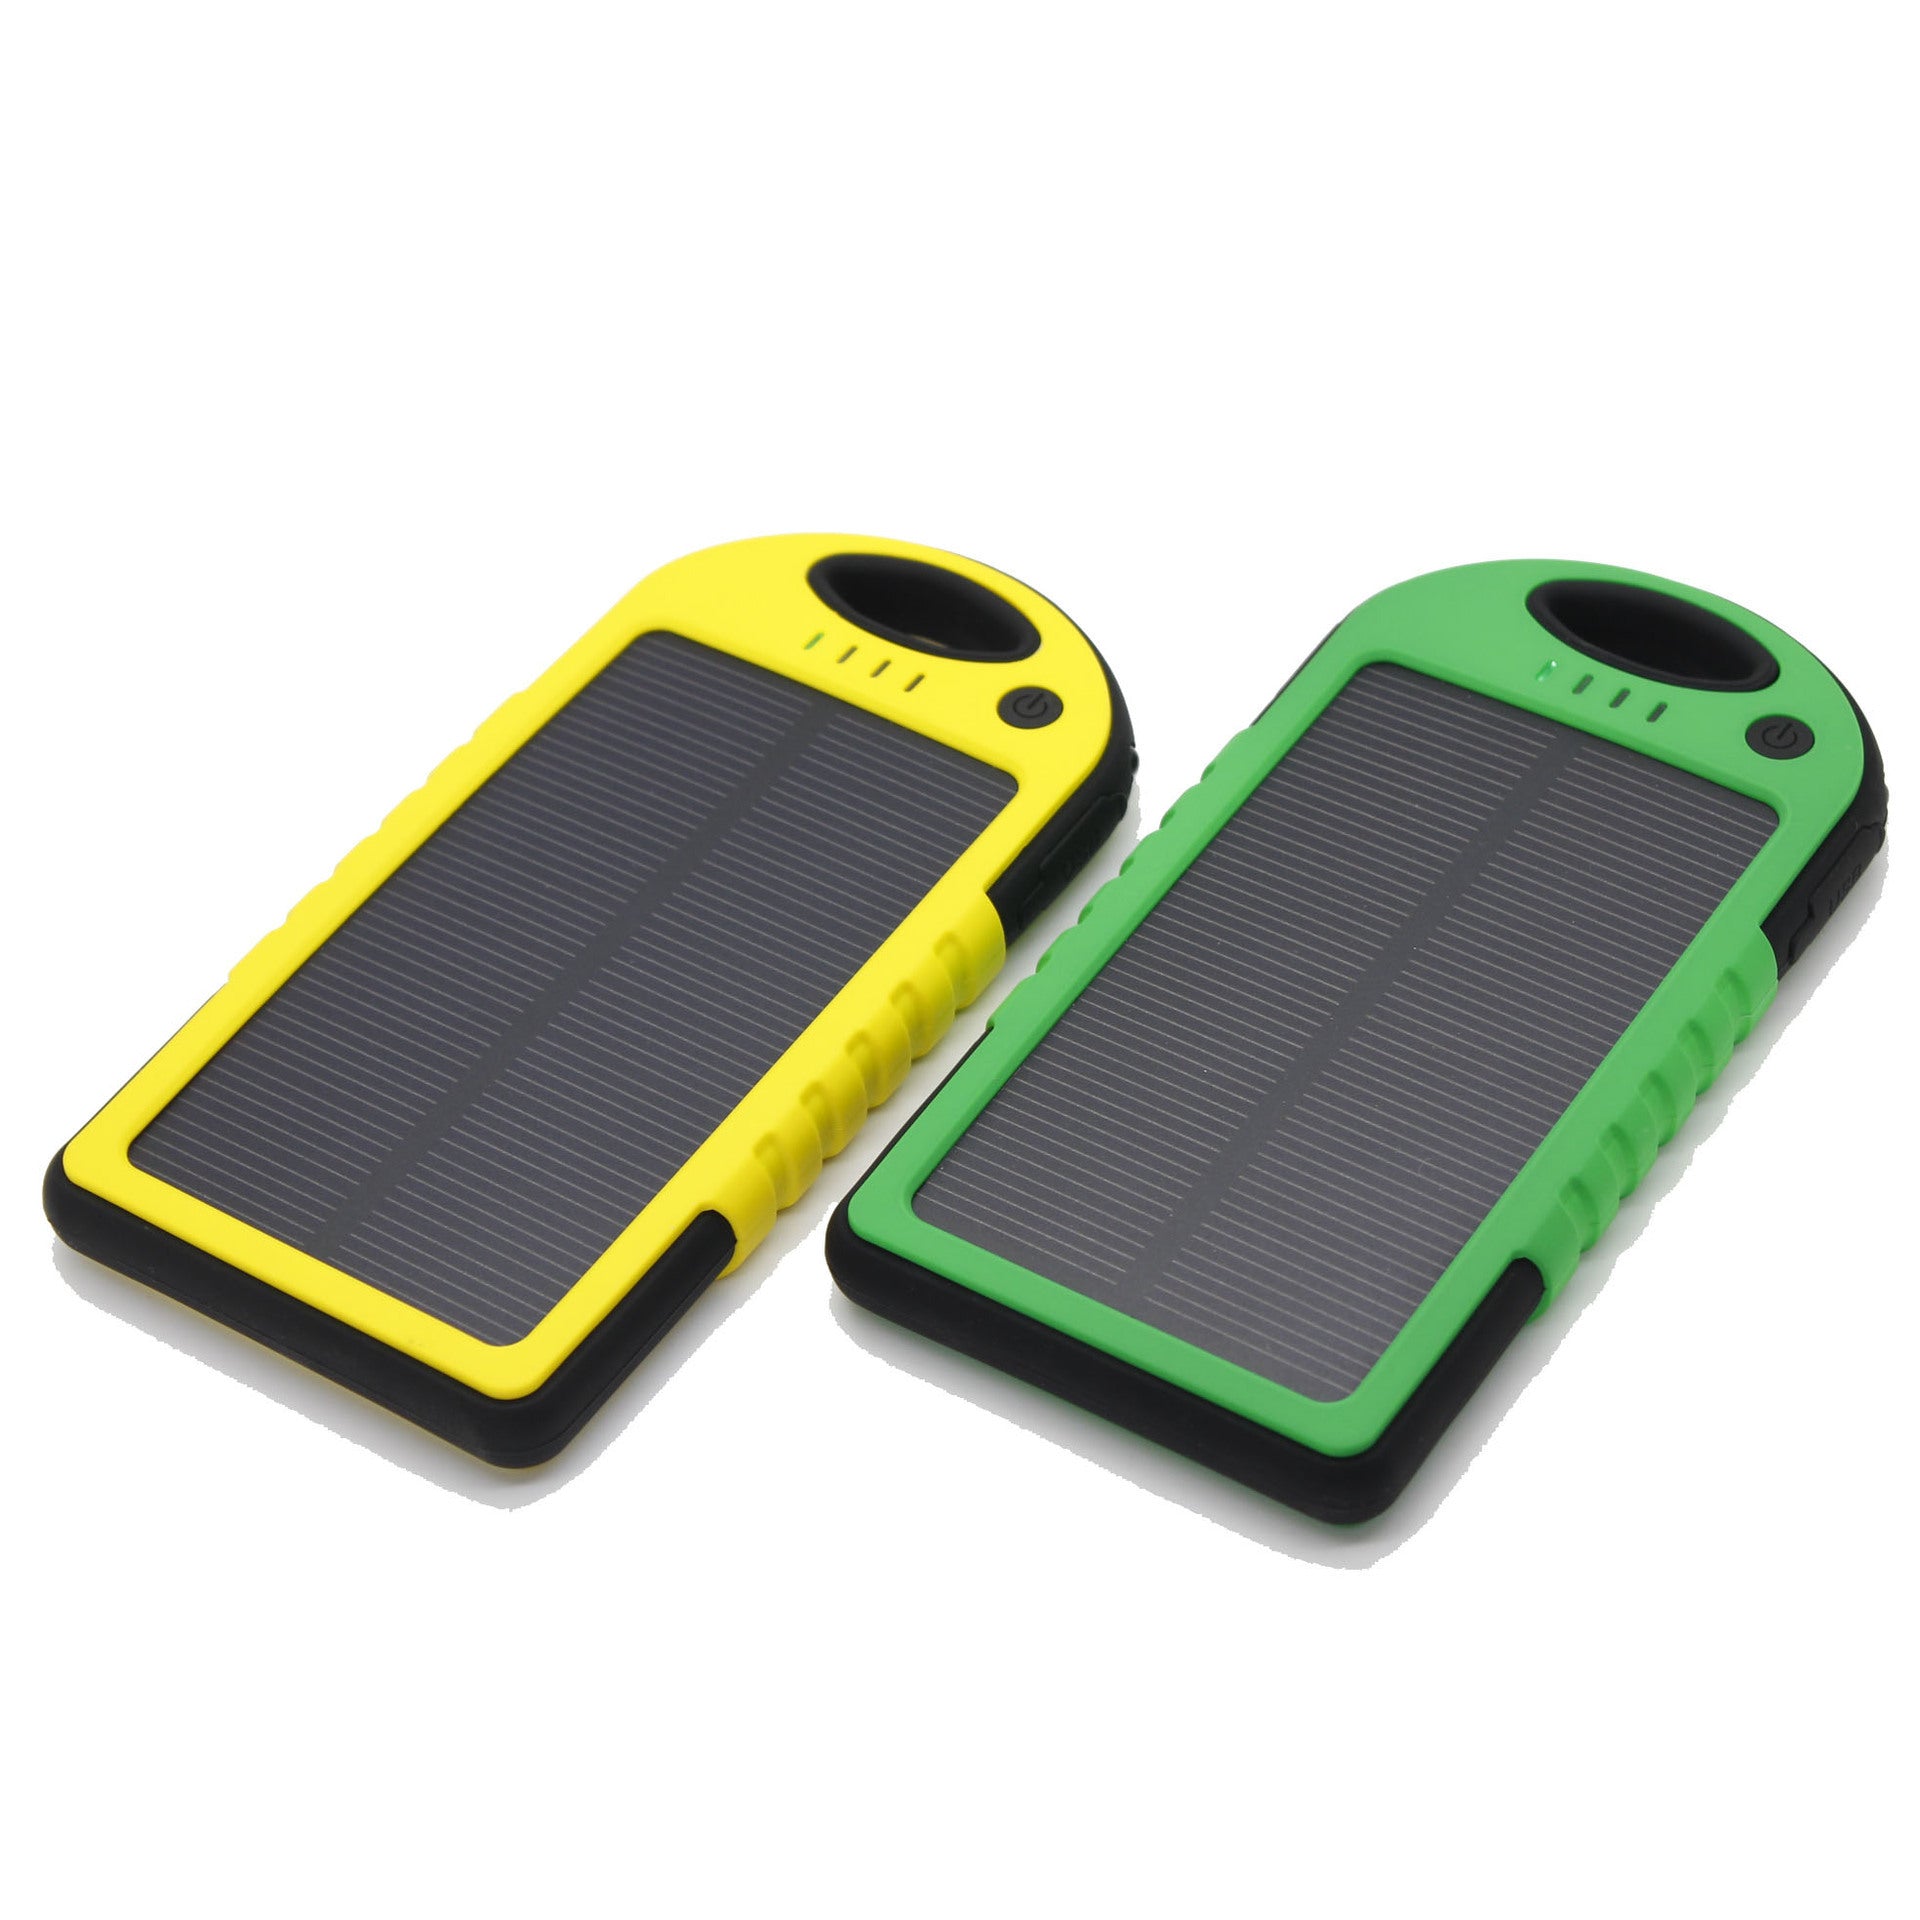 Solar Power Bank Dual Battery Charger | Decor Gifts and More